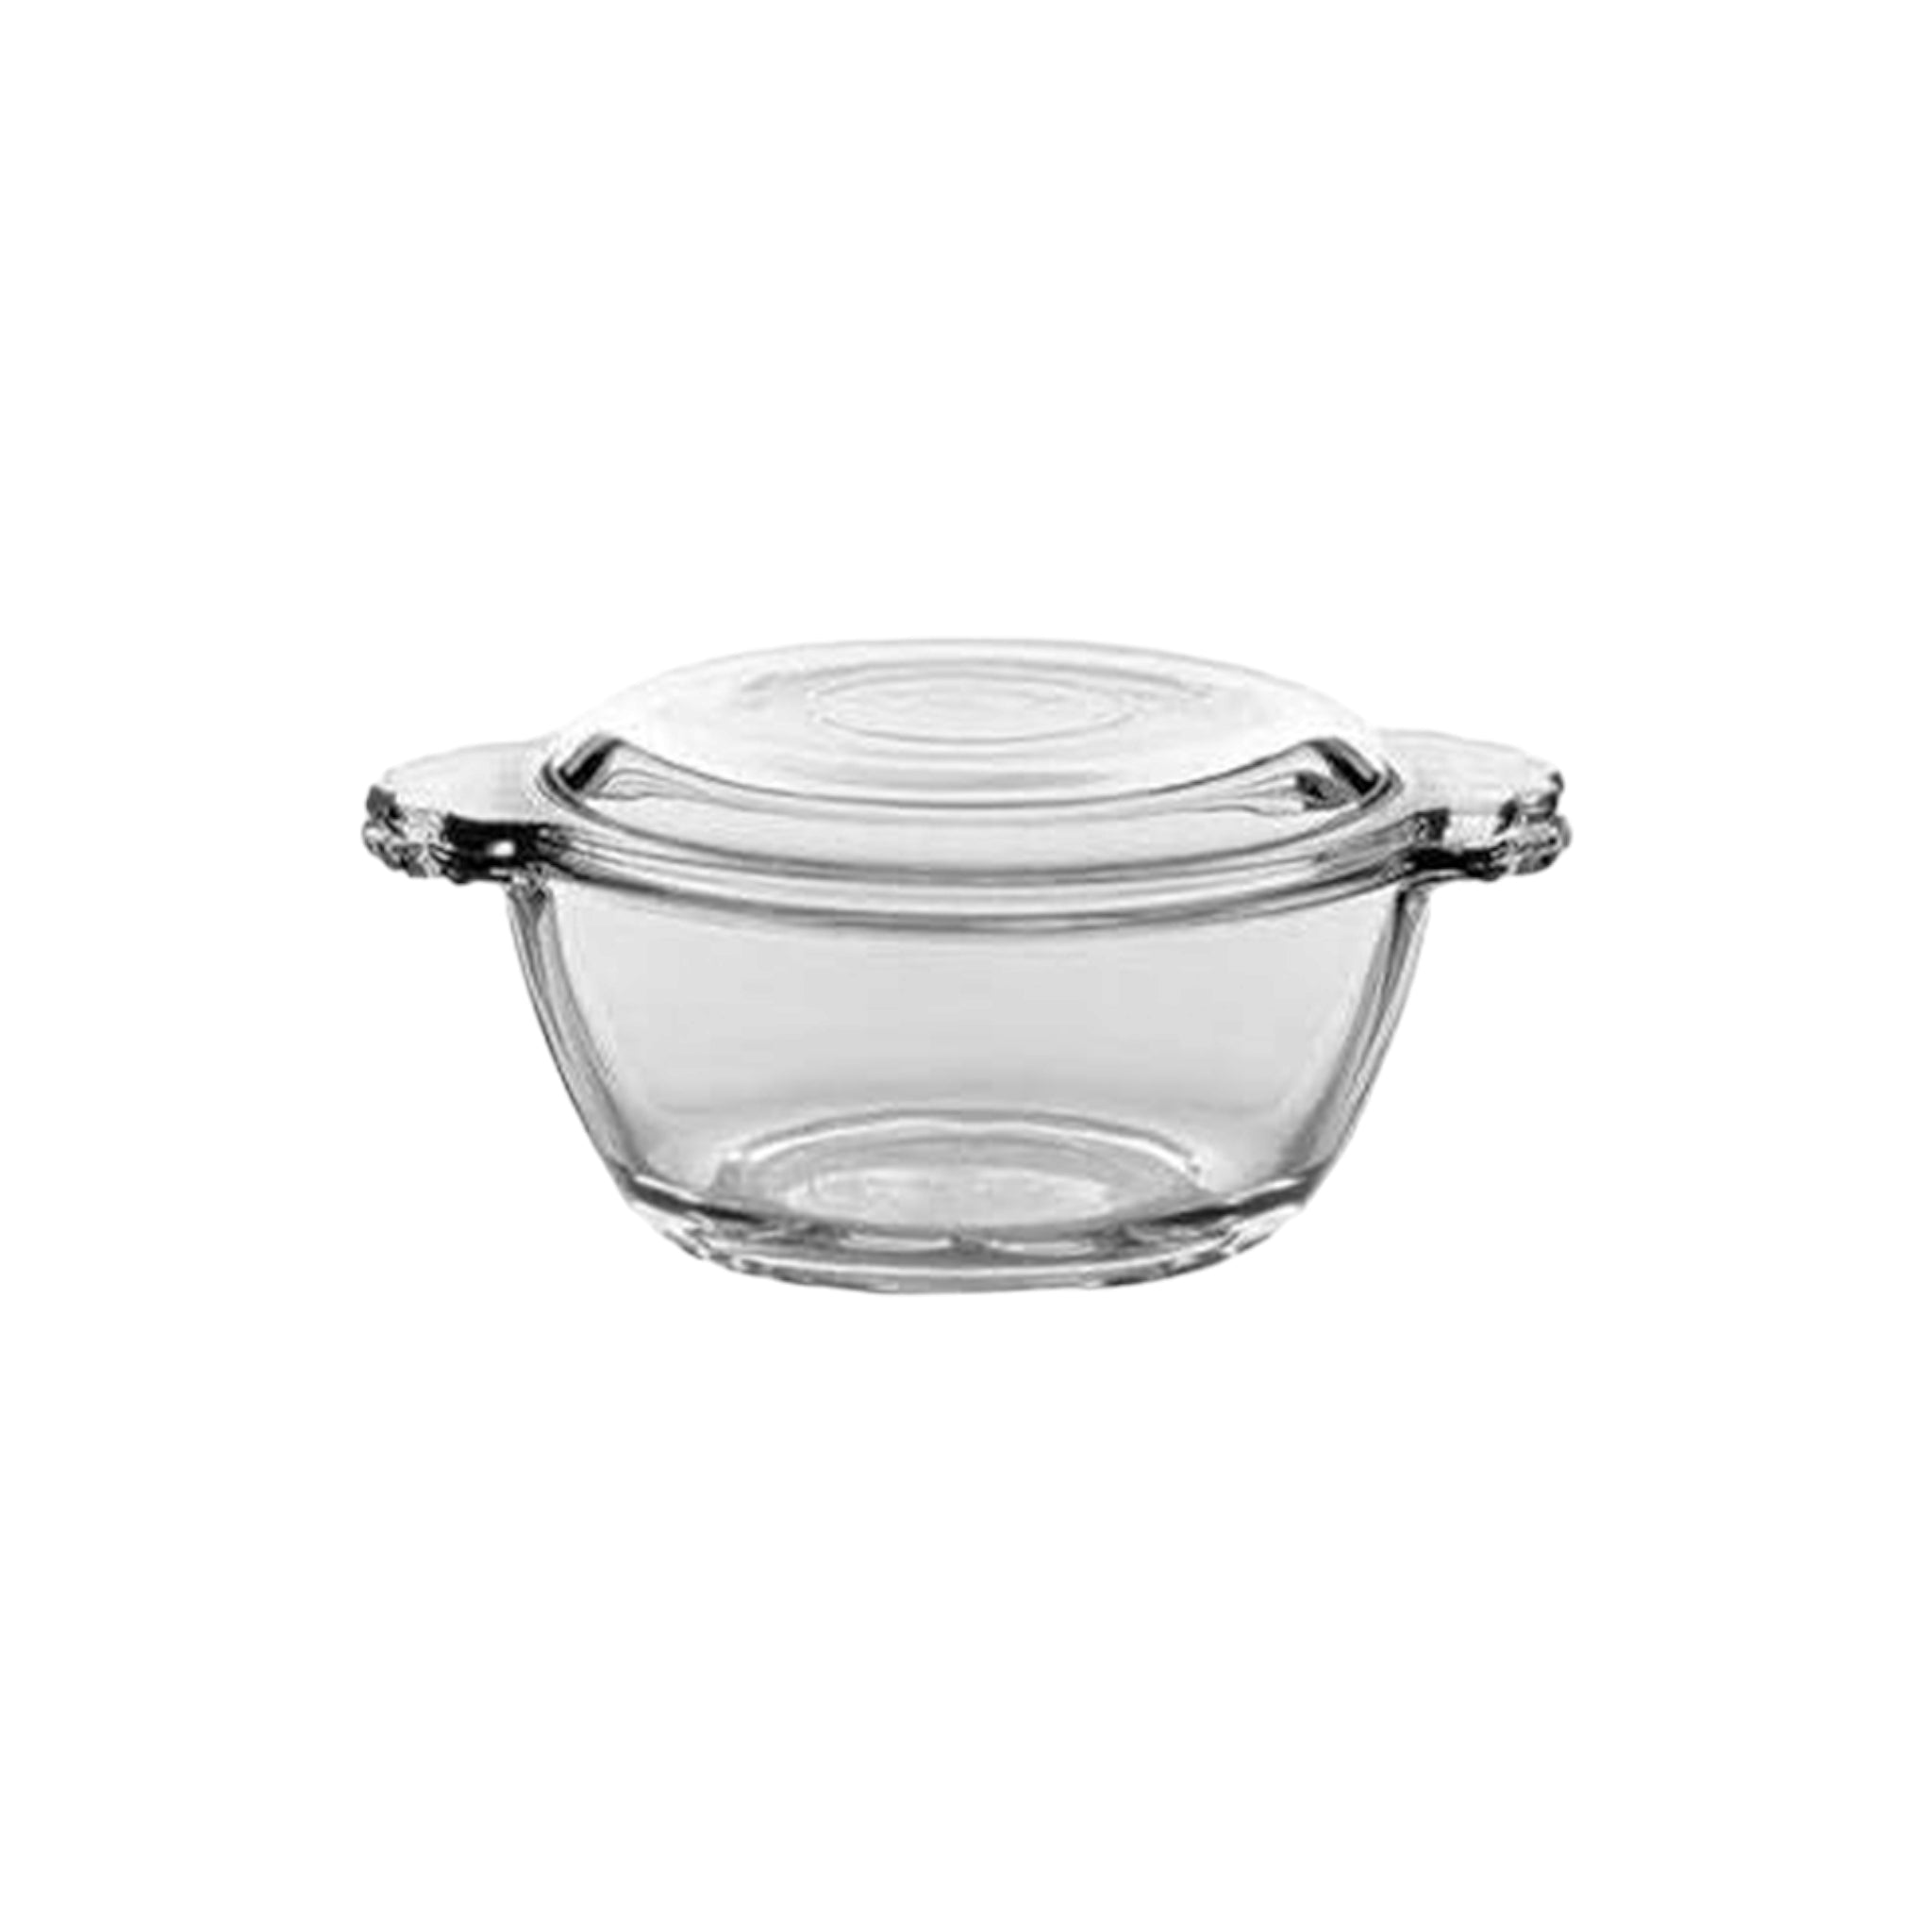 Pasabahce Mini Casserole Bowl Round with Glass Cover 275ml 2pc 23198